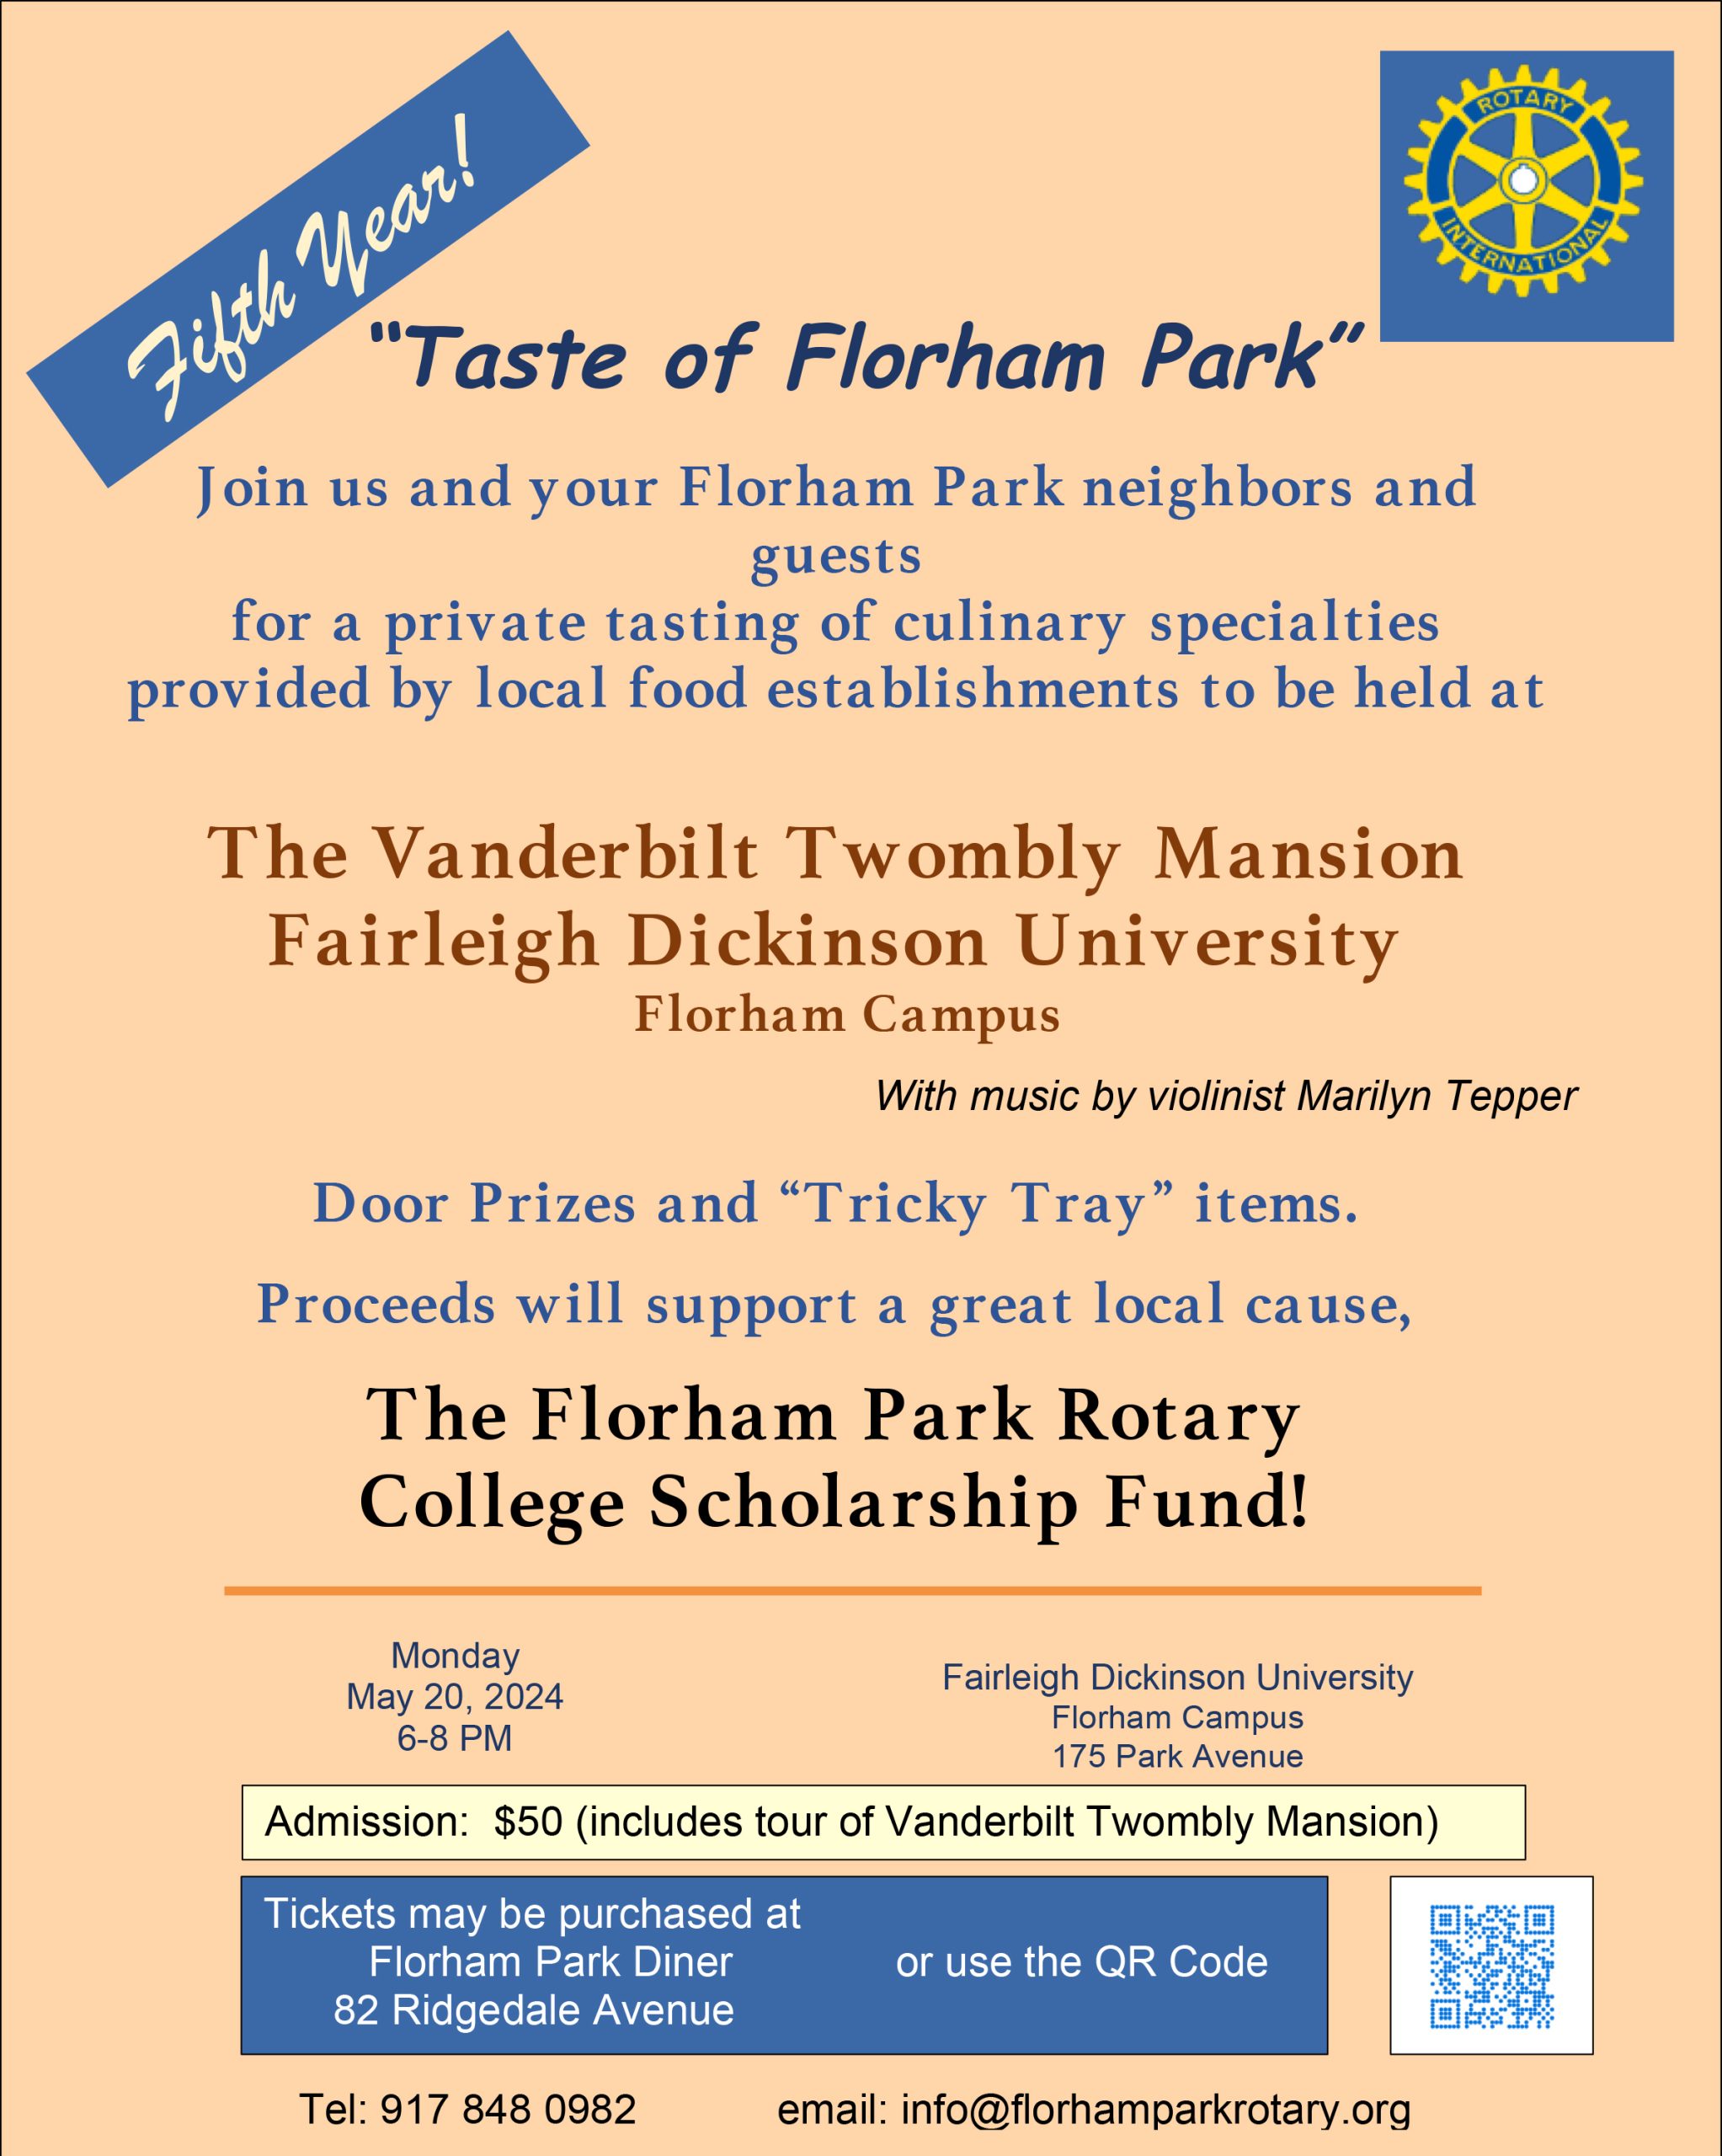 5th Annual Taste of Florham Park set for May 20th